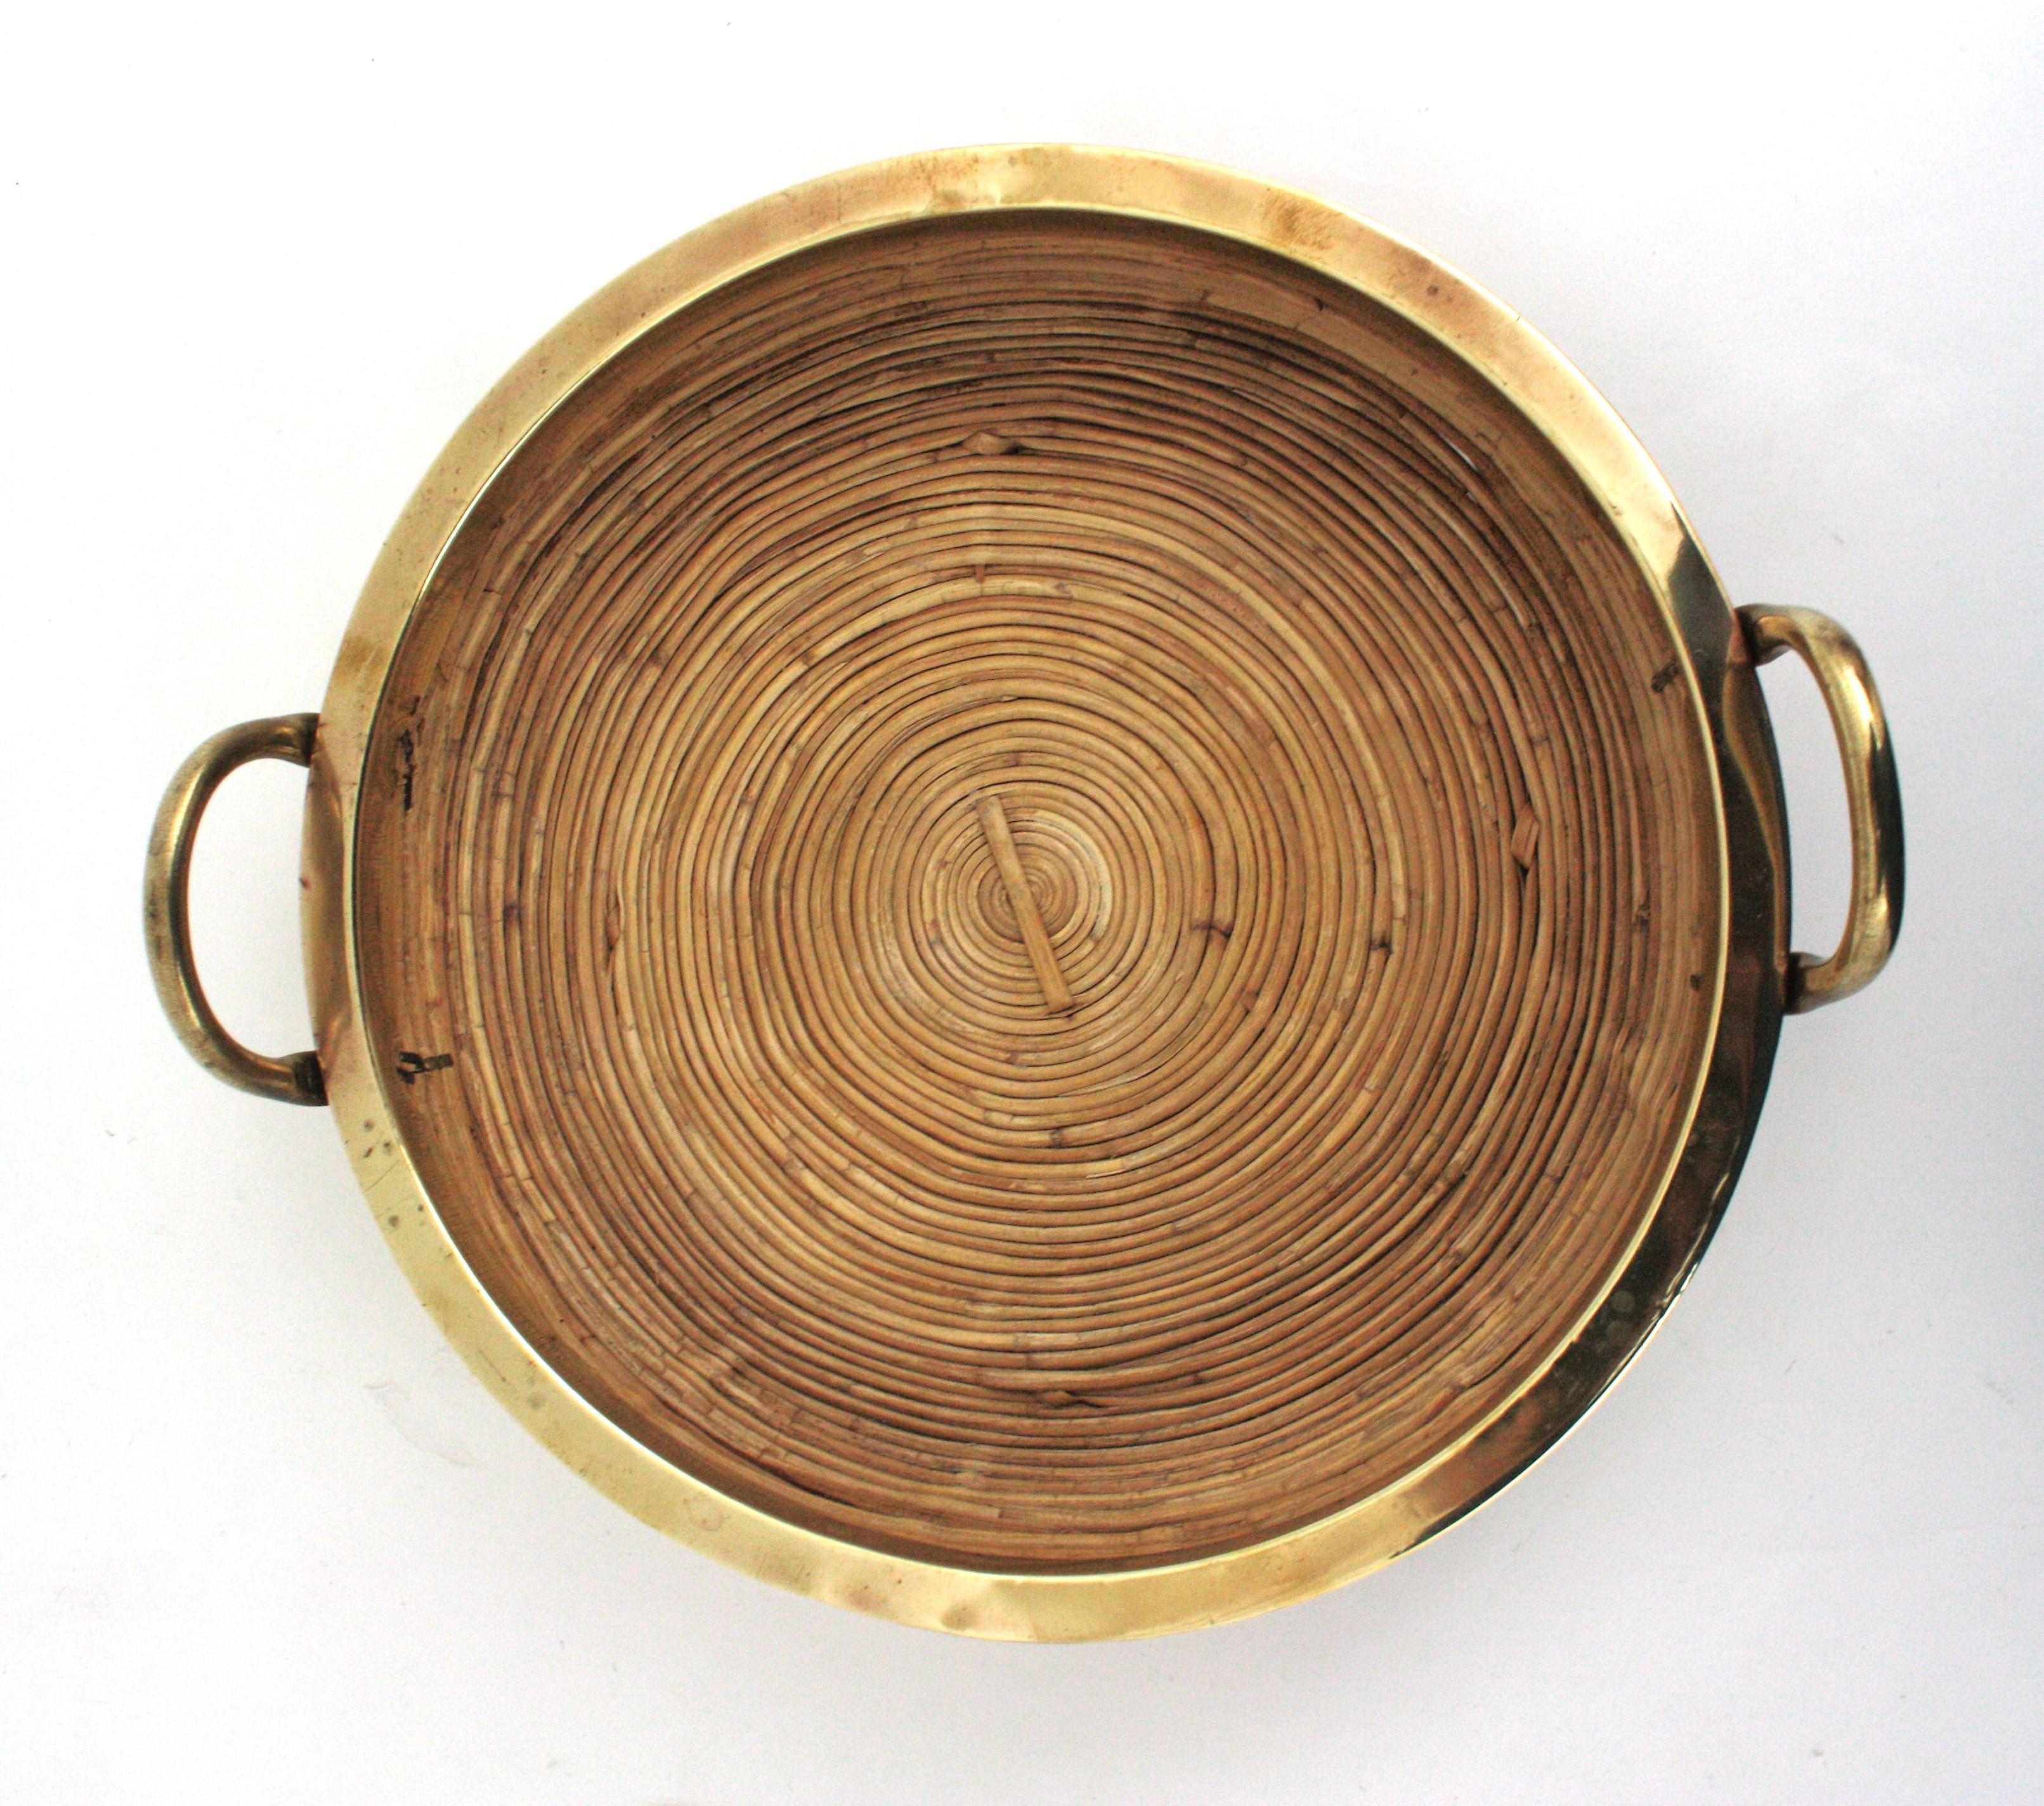 Rattan and Brass Italian Centerpiece Tray Basket, 1970s For Sale 2